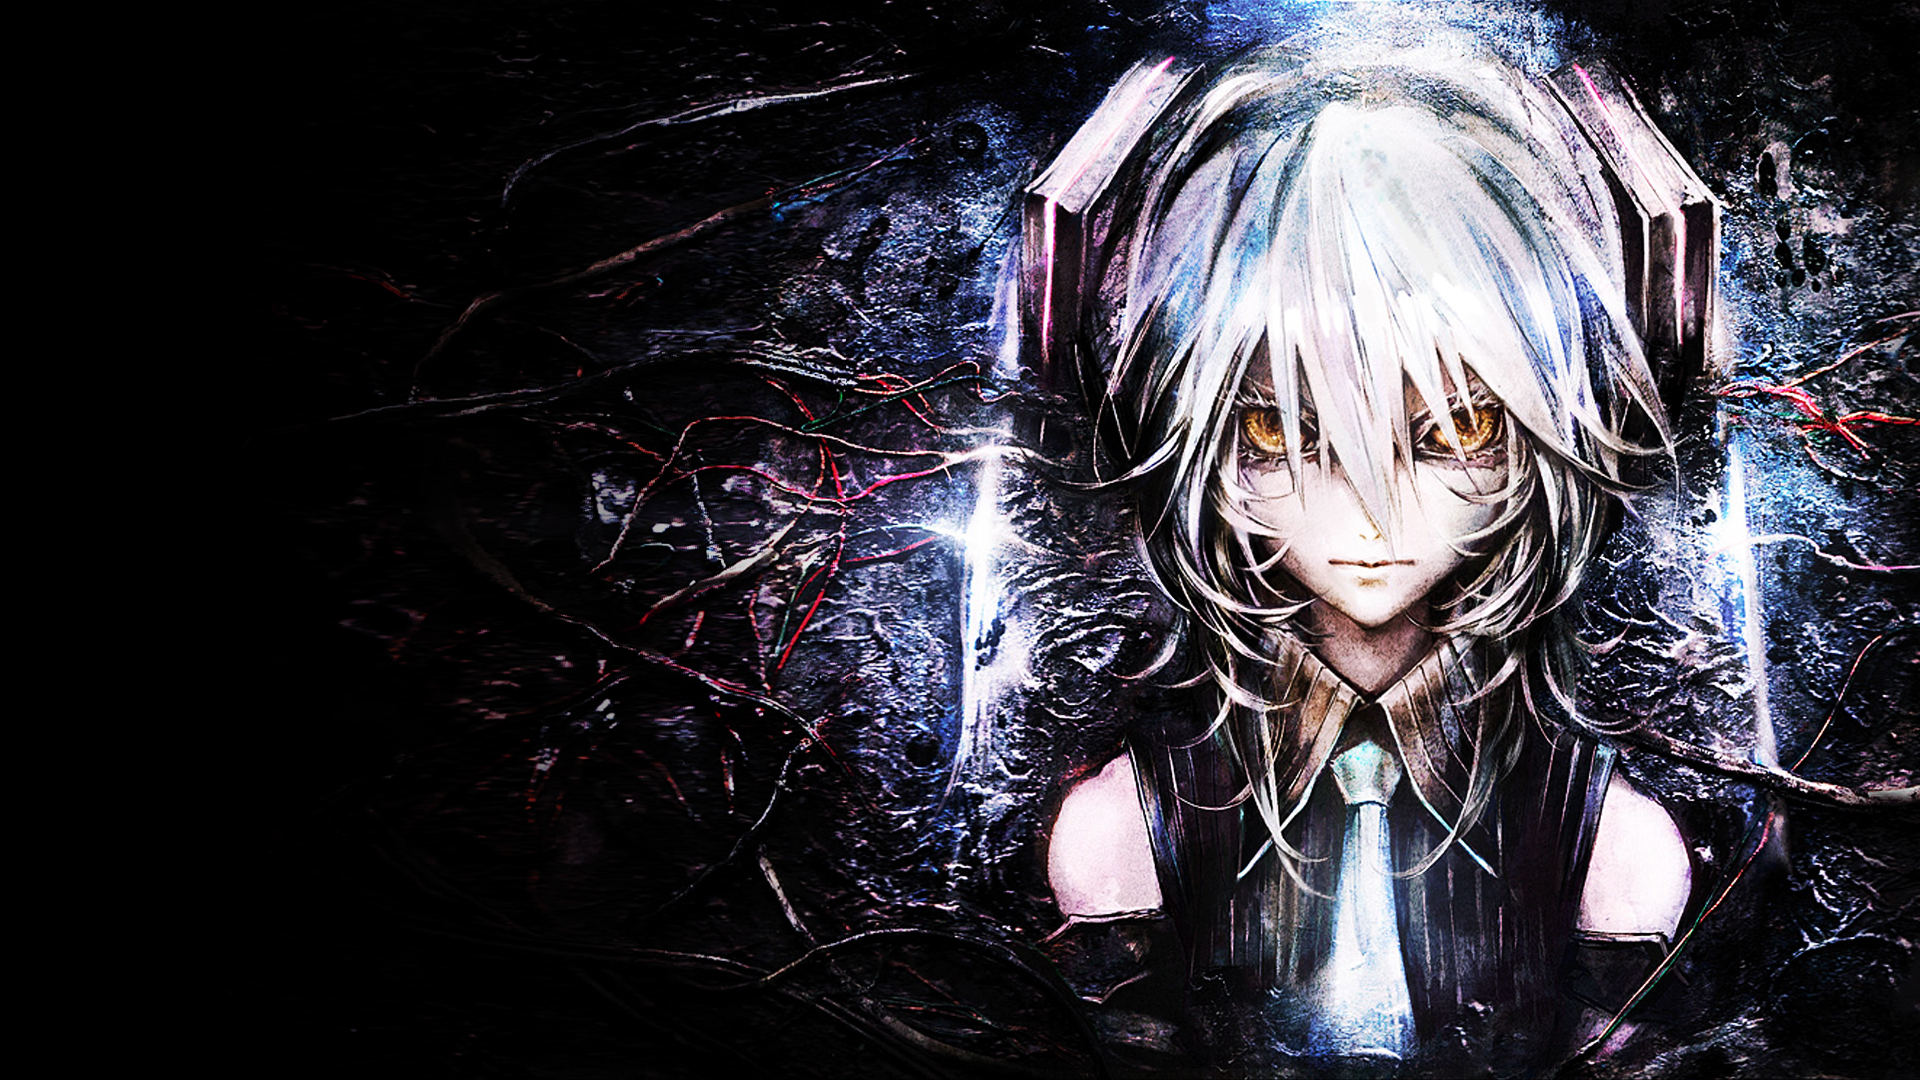 awesome anime wallpapers,cg artwork,anime,black hair,darkness,illustration